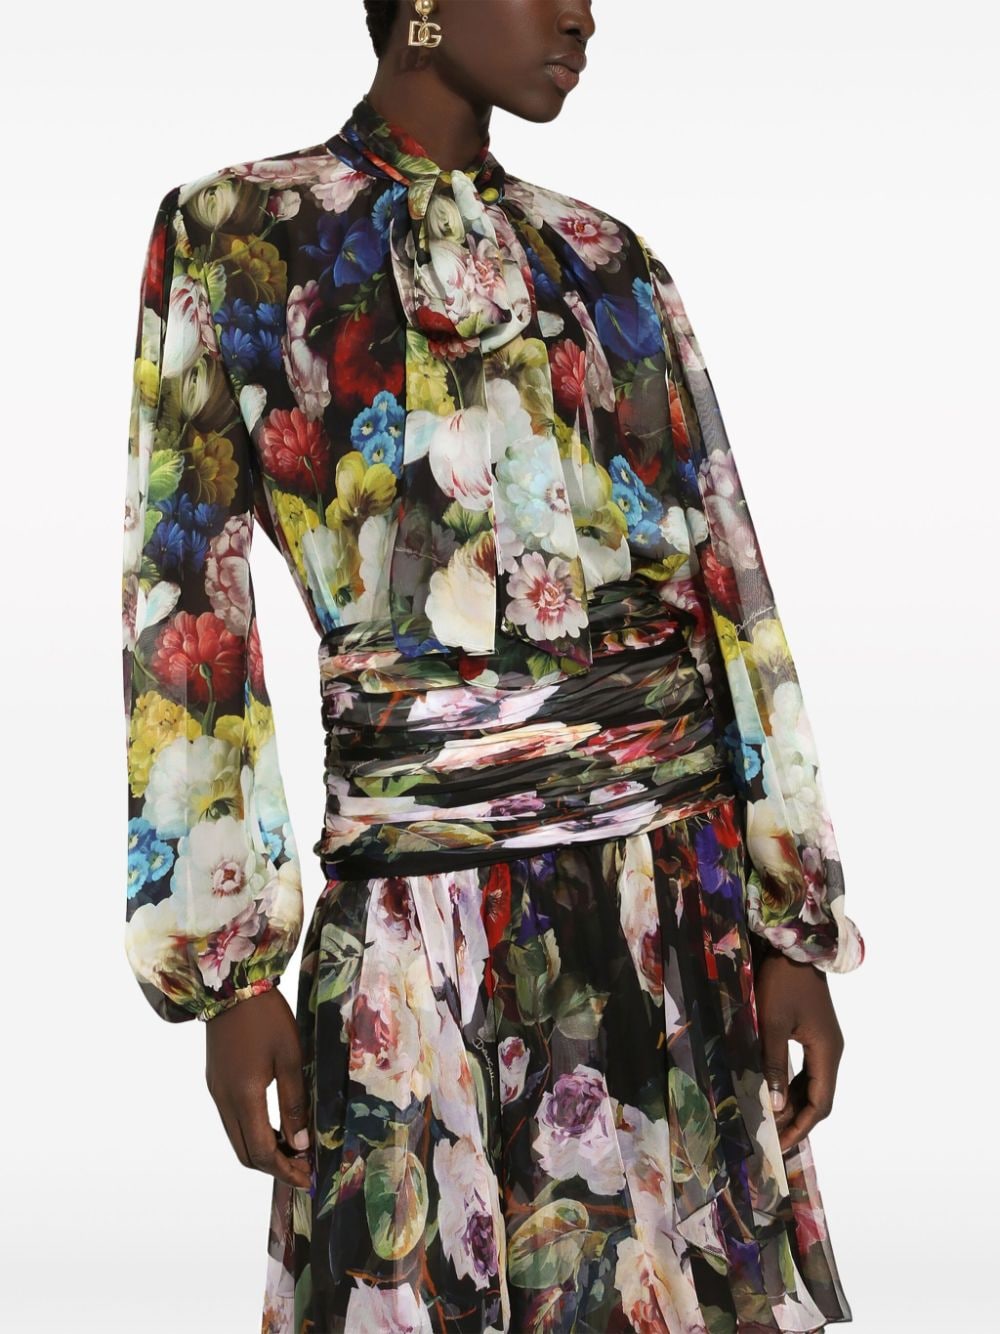 All-over floral print shirt